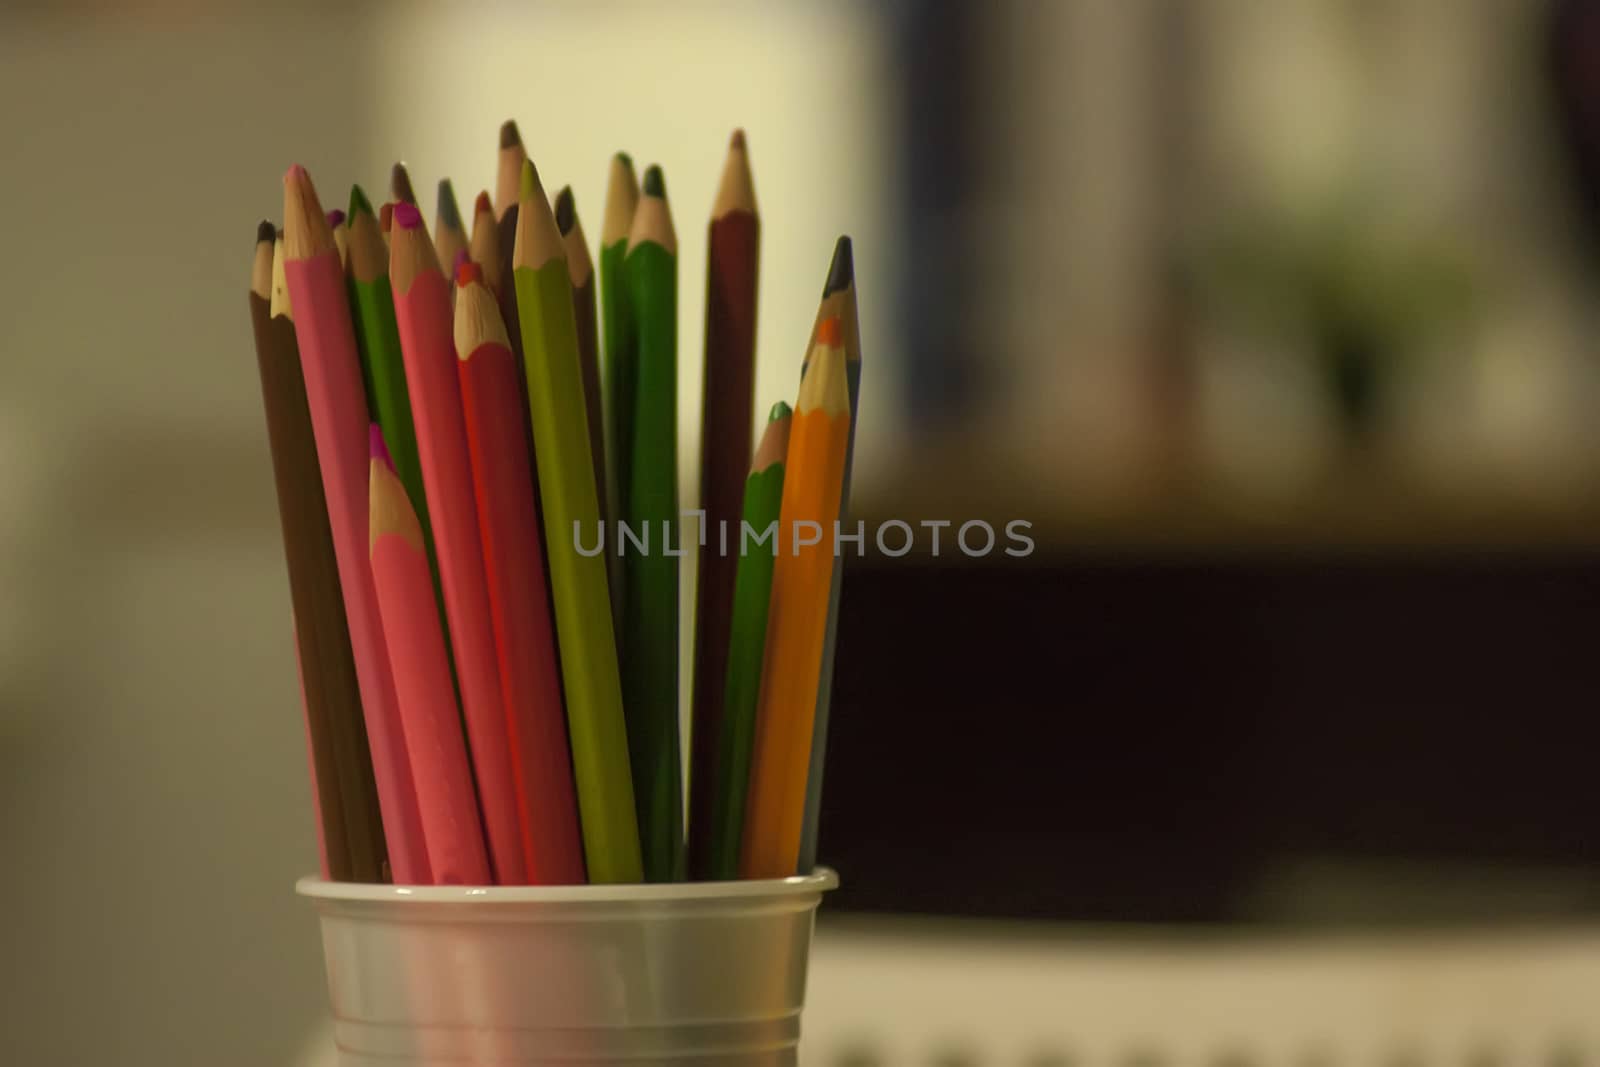 container full of colored pencils ready to draw